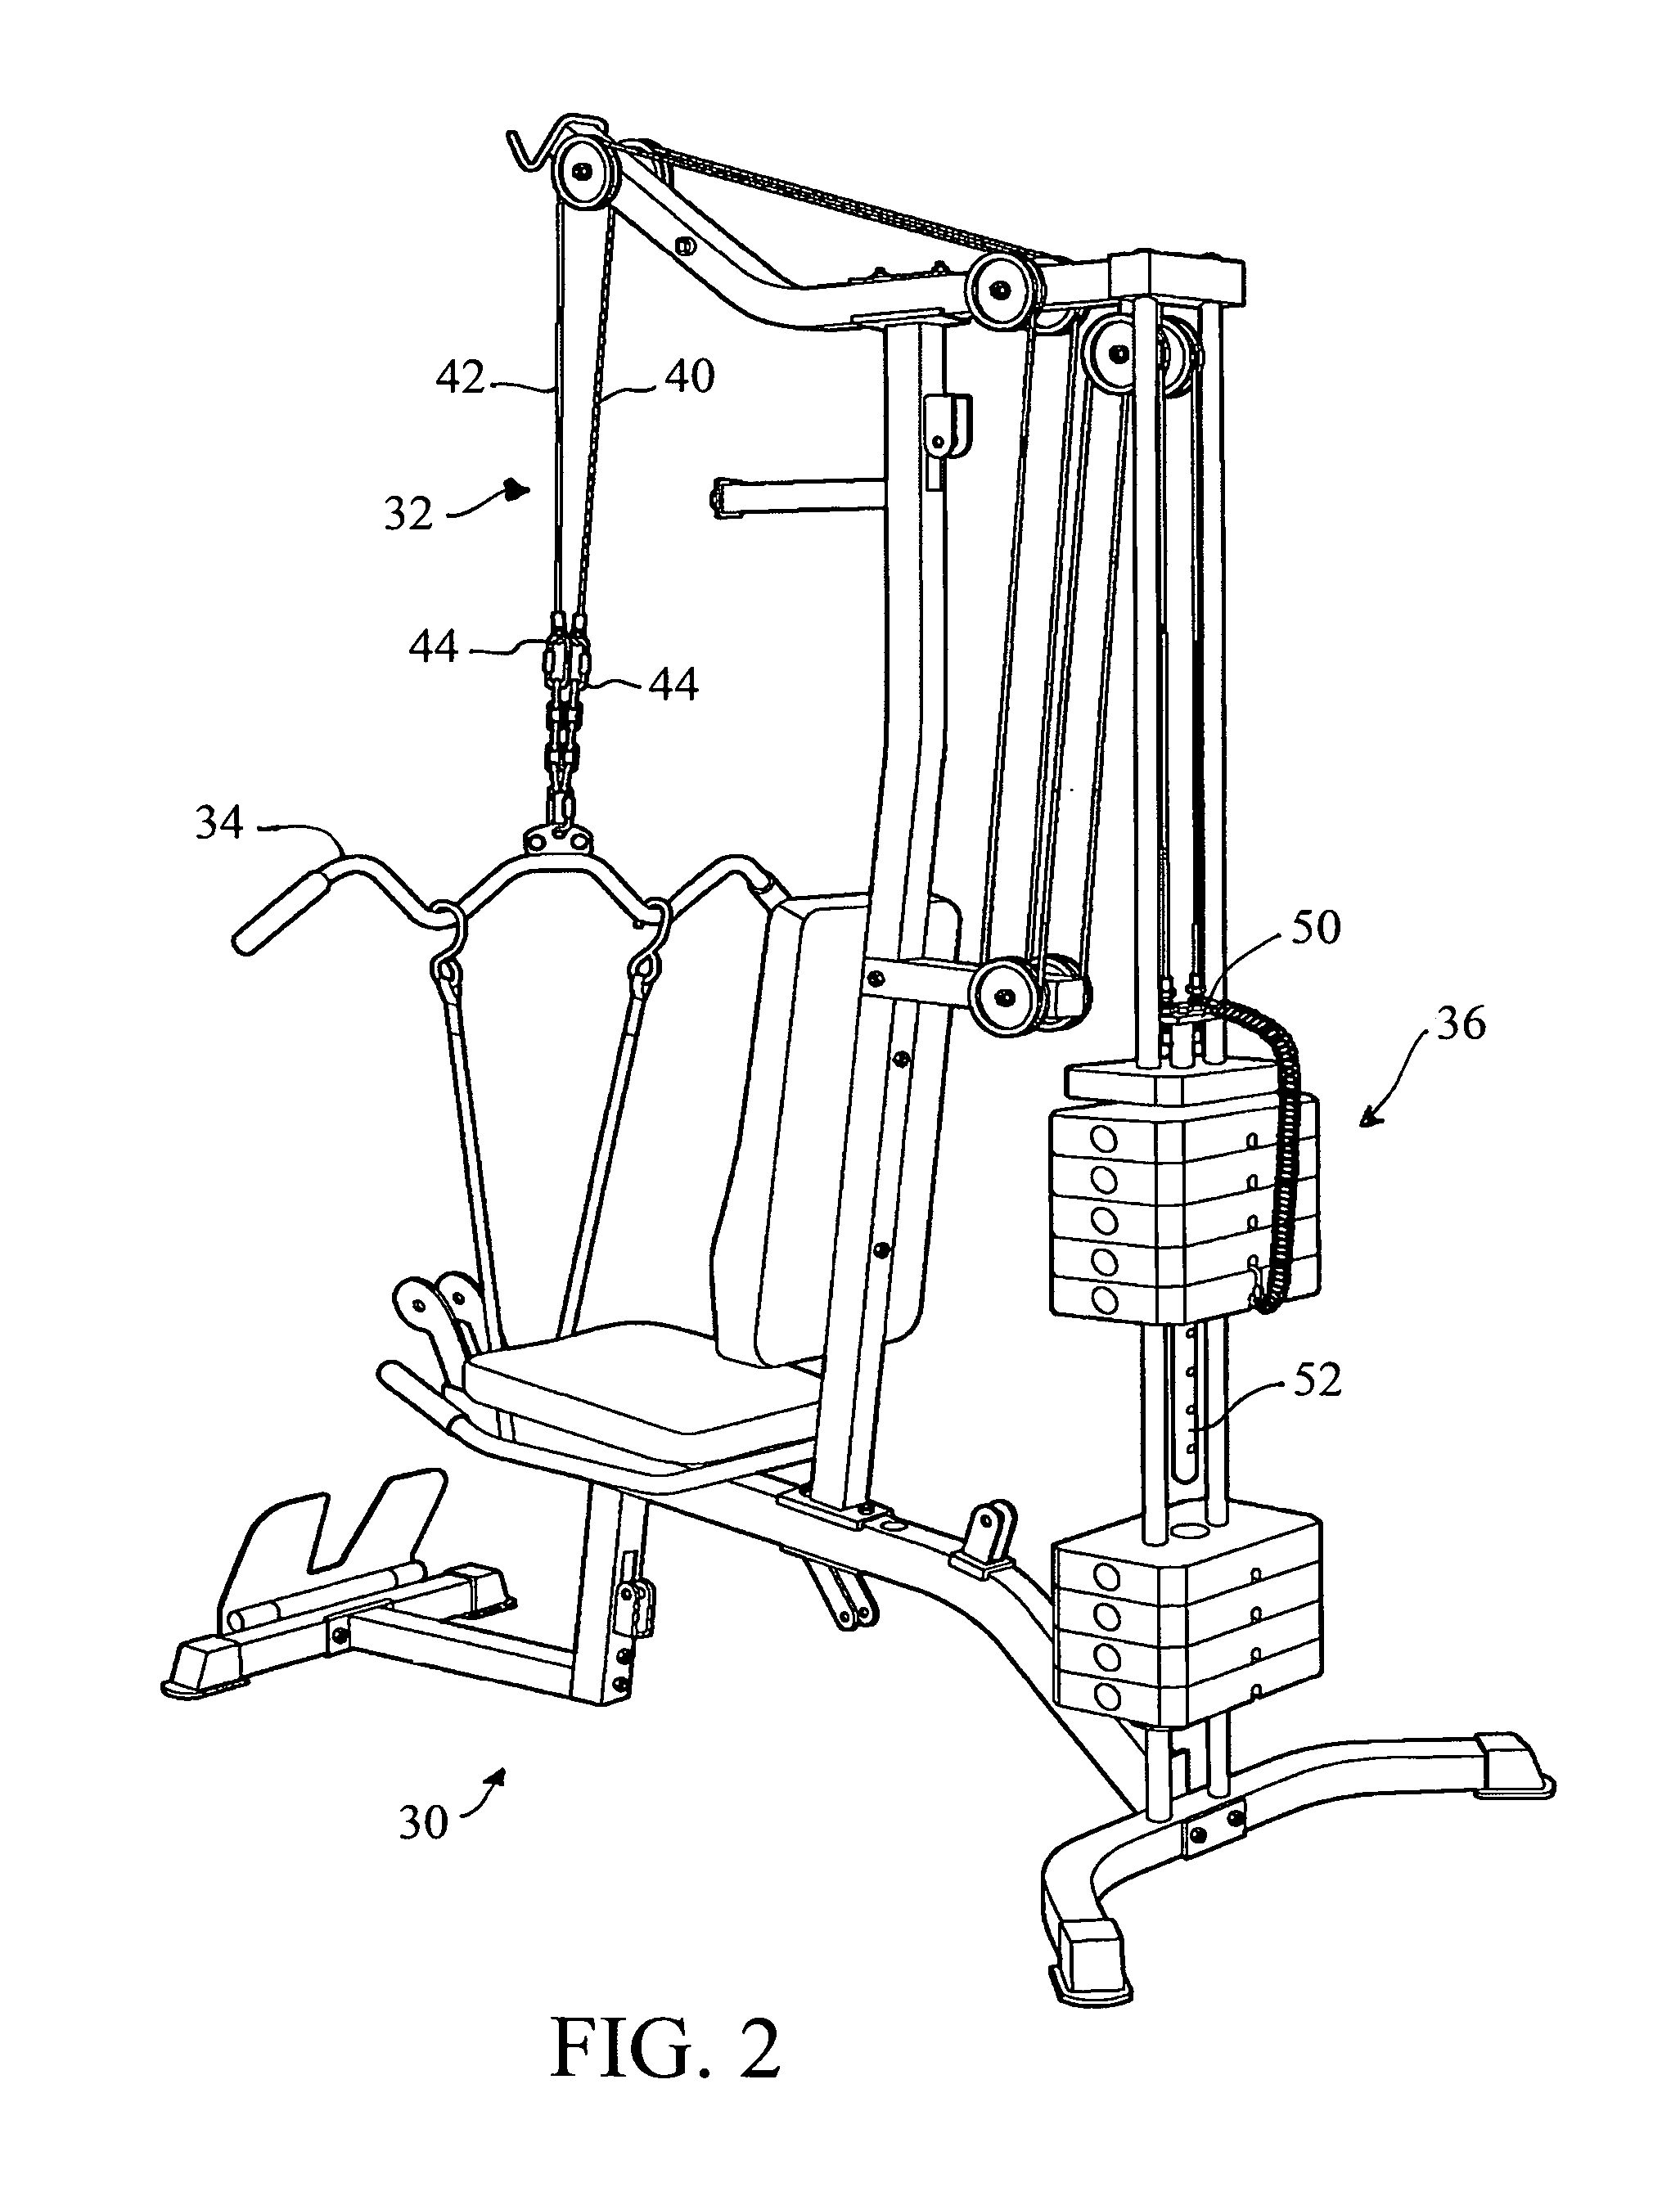 Fitness equipment cable safety apparatus